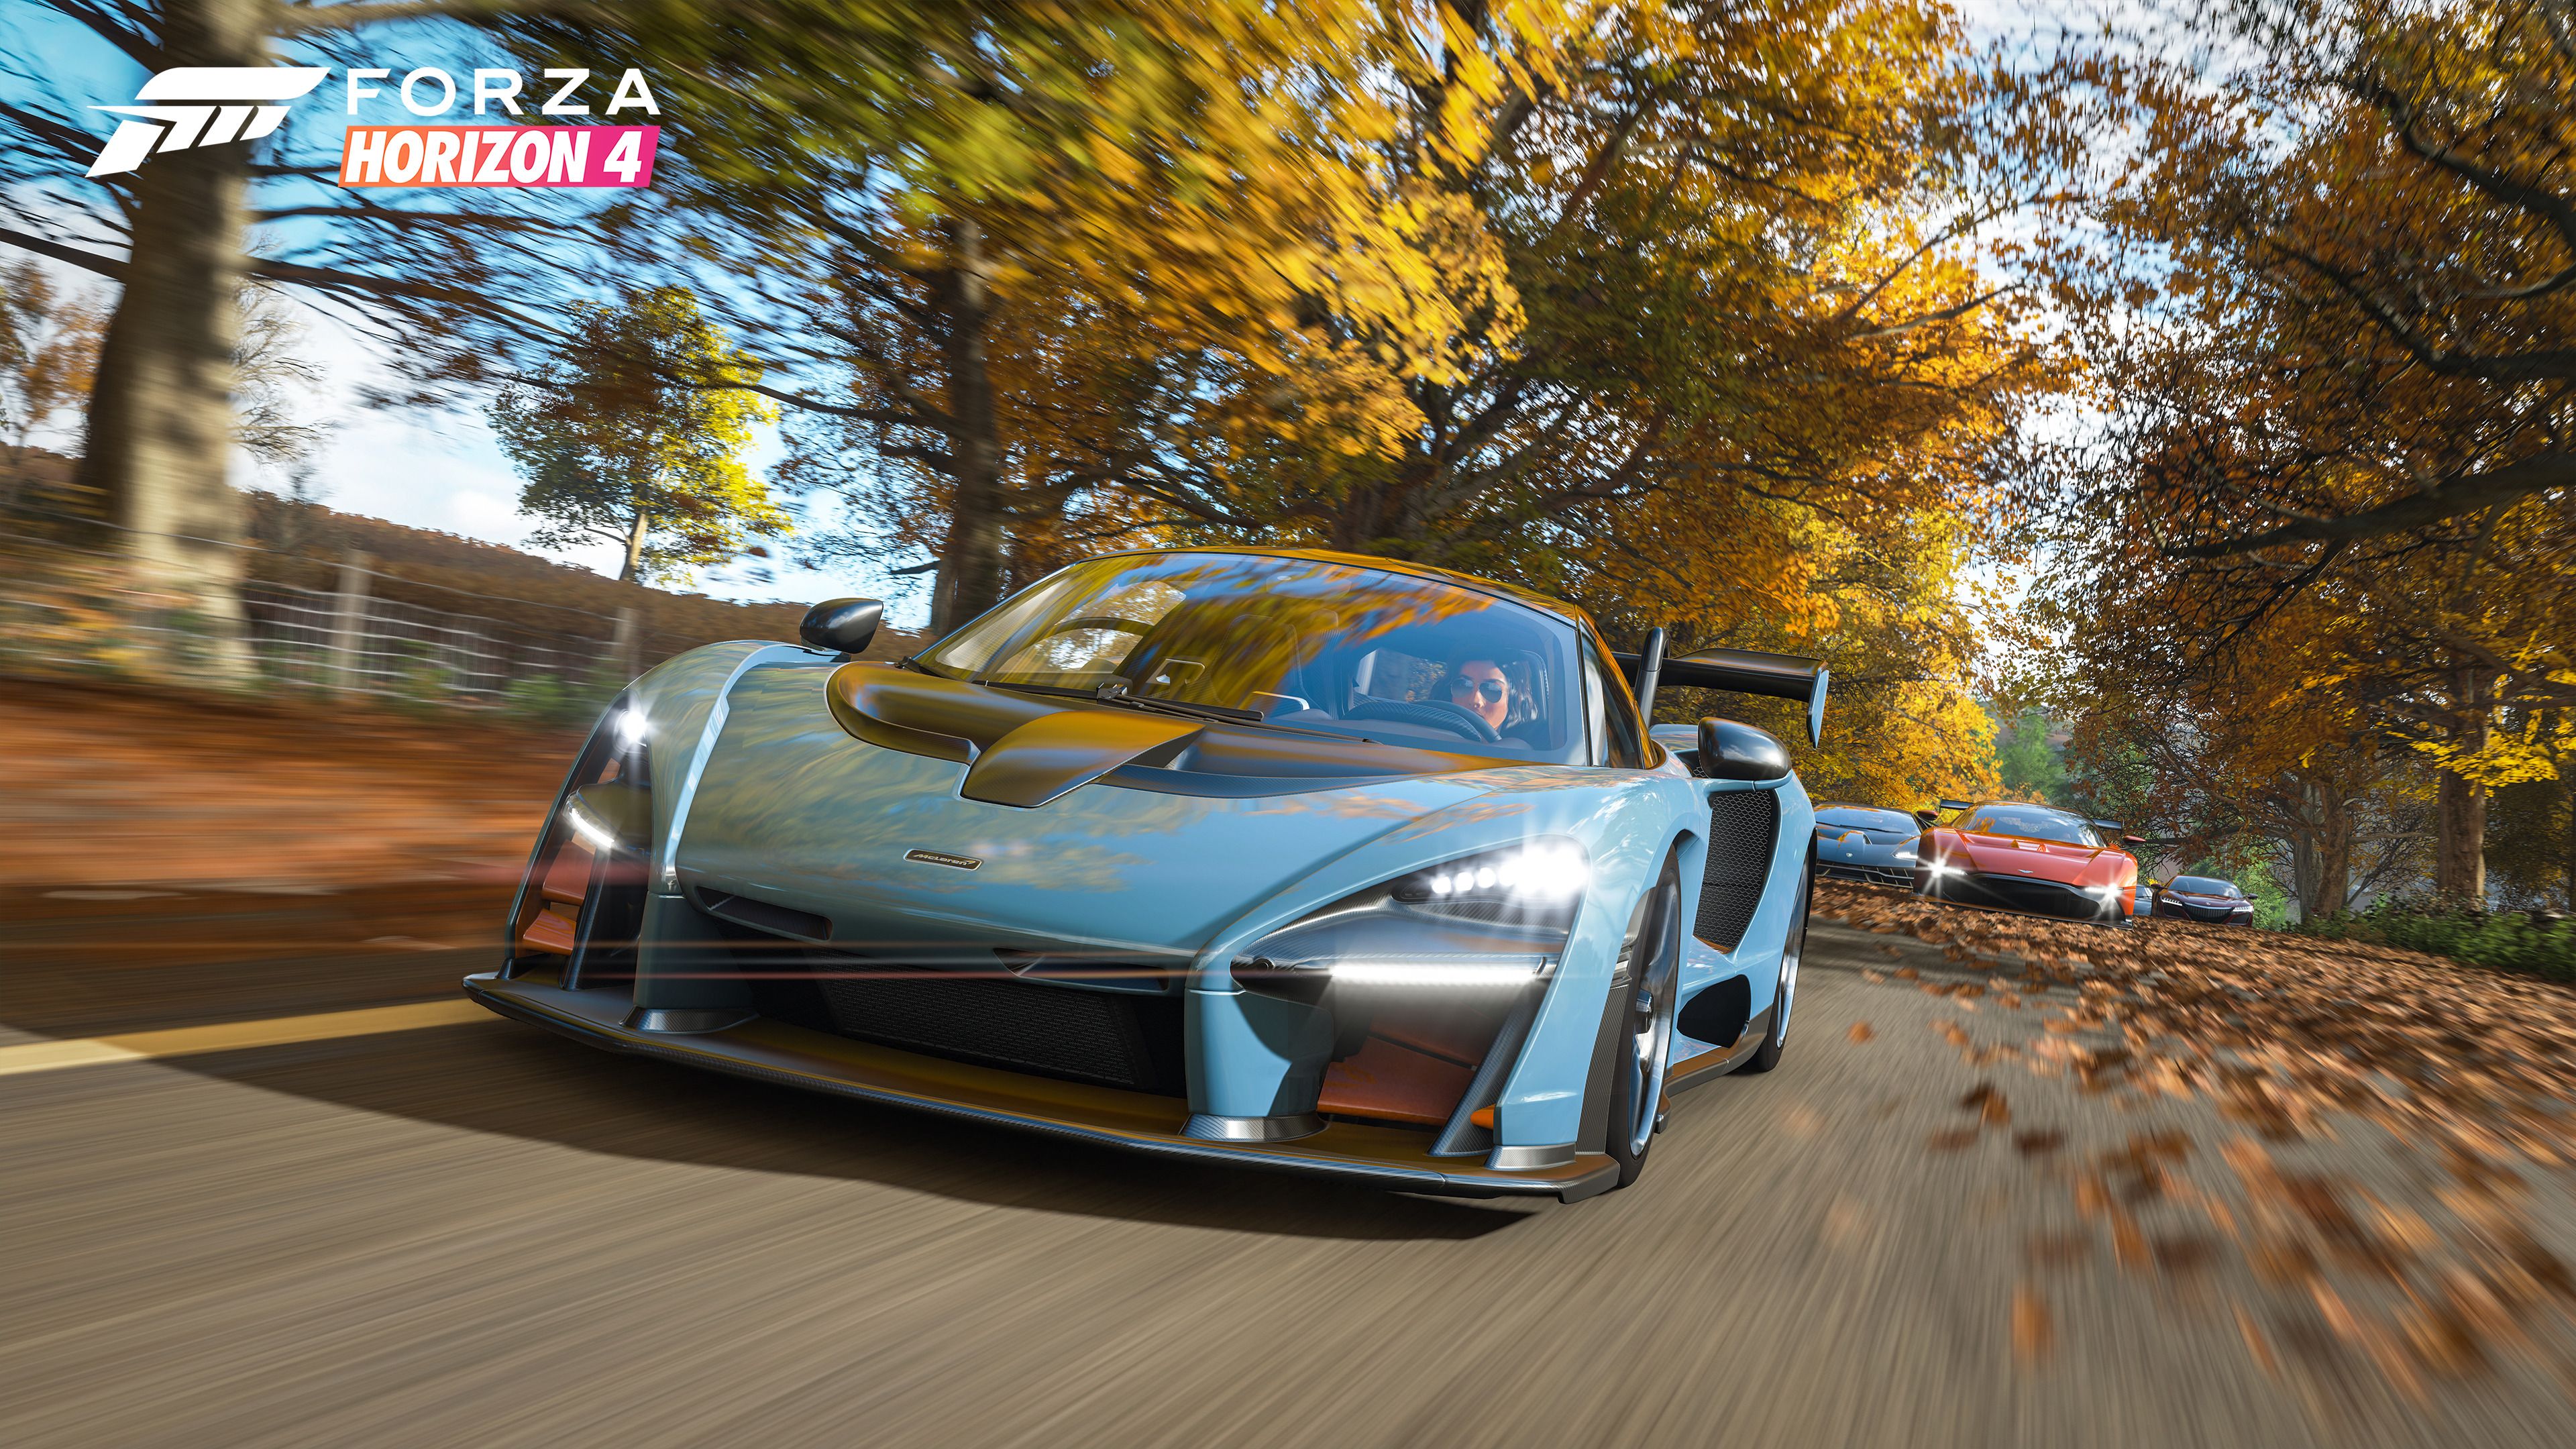 Forza Horizon 4 Images Wallpapers